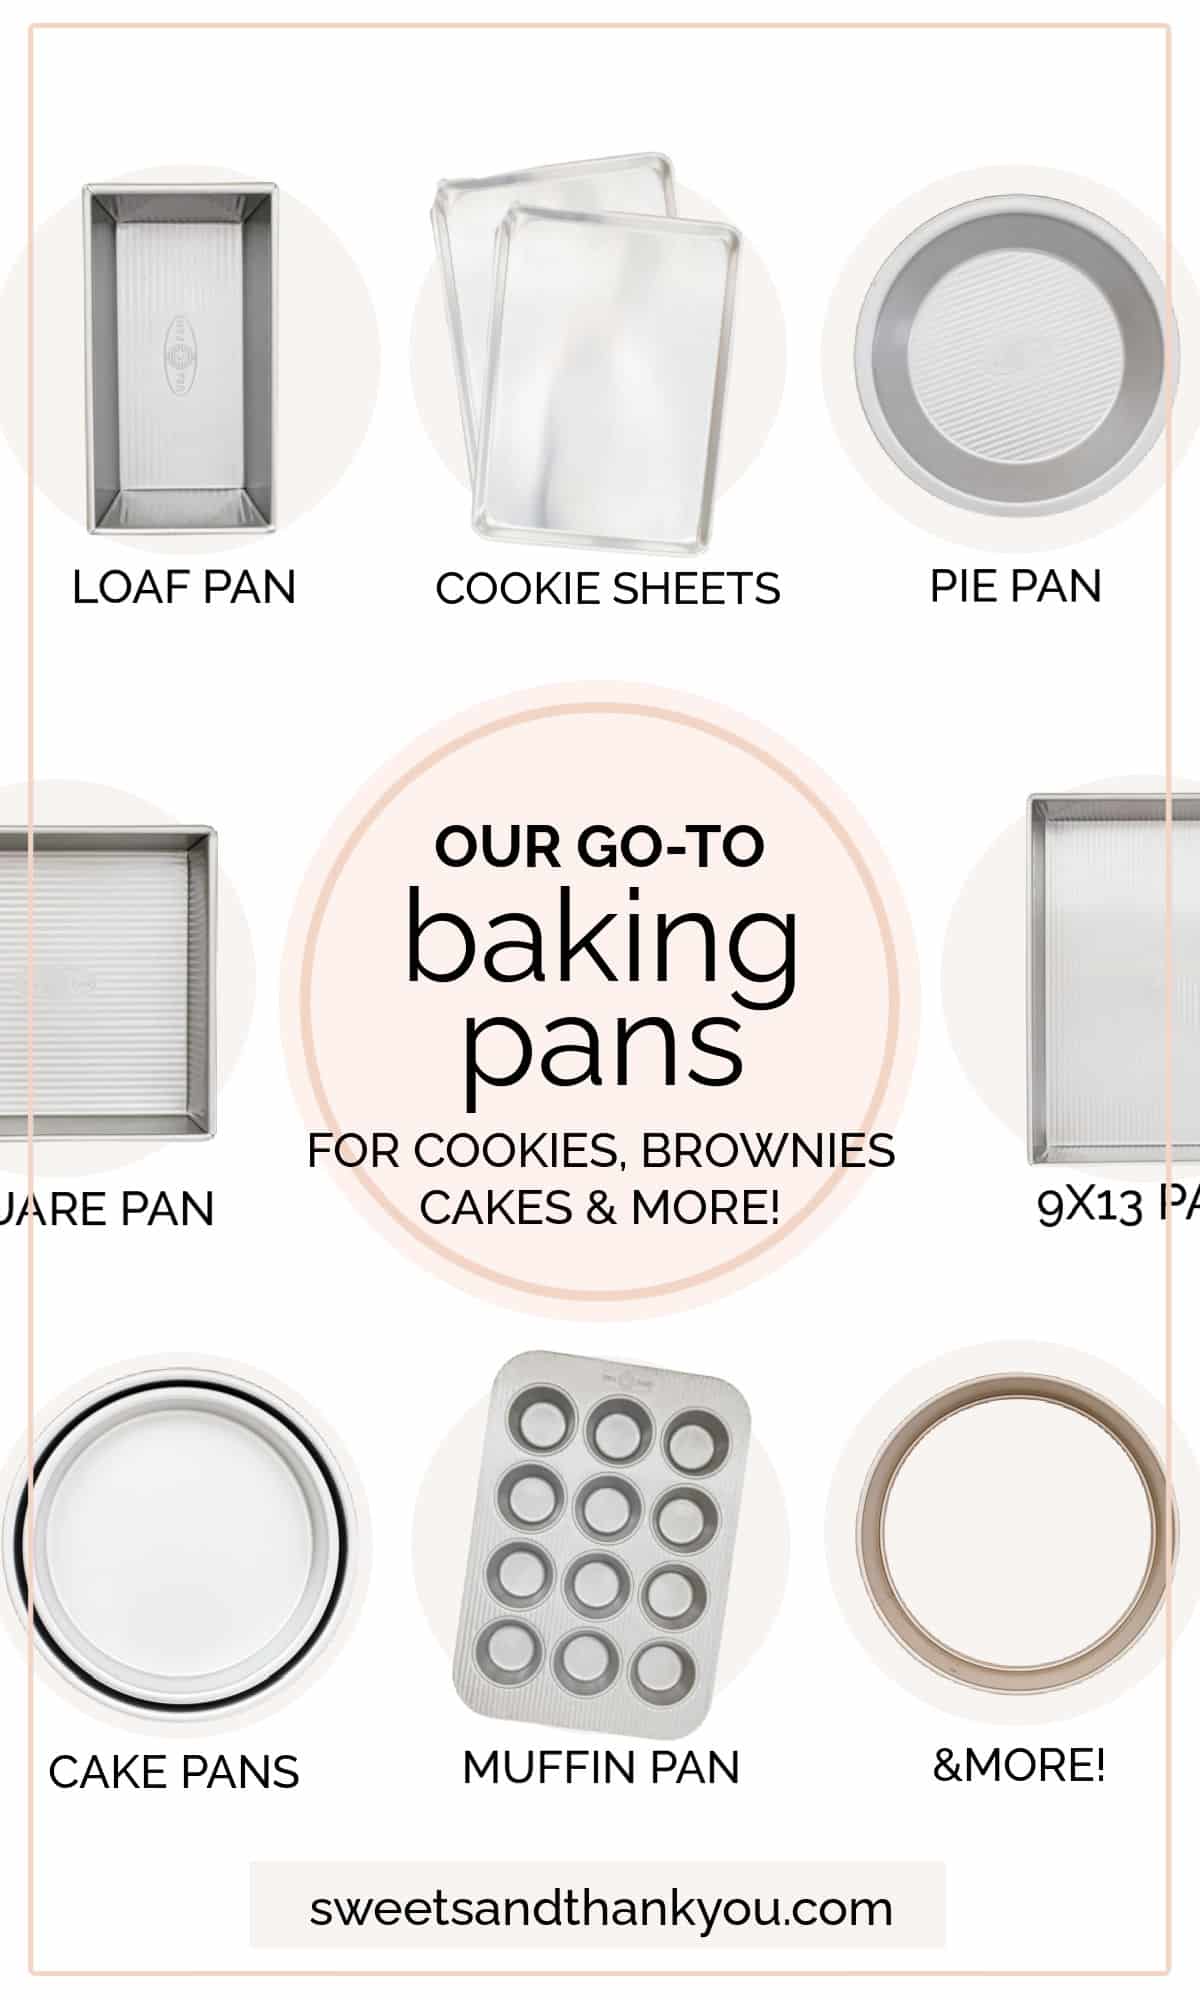 These are the baking pans we use all the time. Find the best pan for cakes, cookies, brownies, and more! / the best cookie sheets / the best pan for brownies / the best cake pans / gifts for bakers / gifts for home bakers / best pans for baking / baking dishes / best pie pans / best loaf pans 